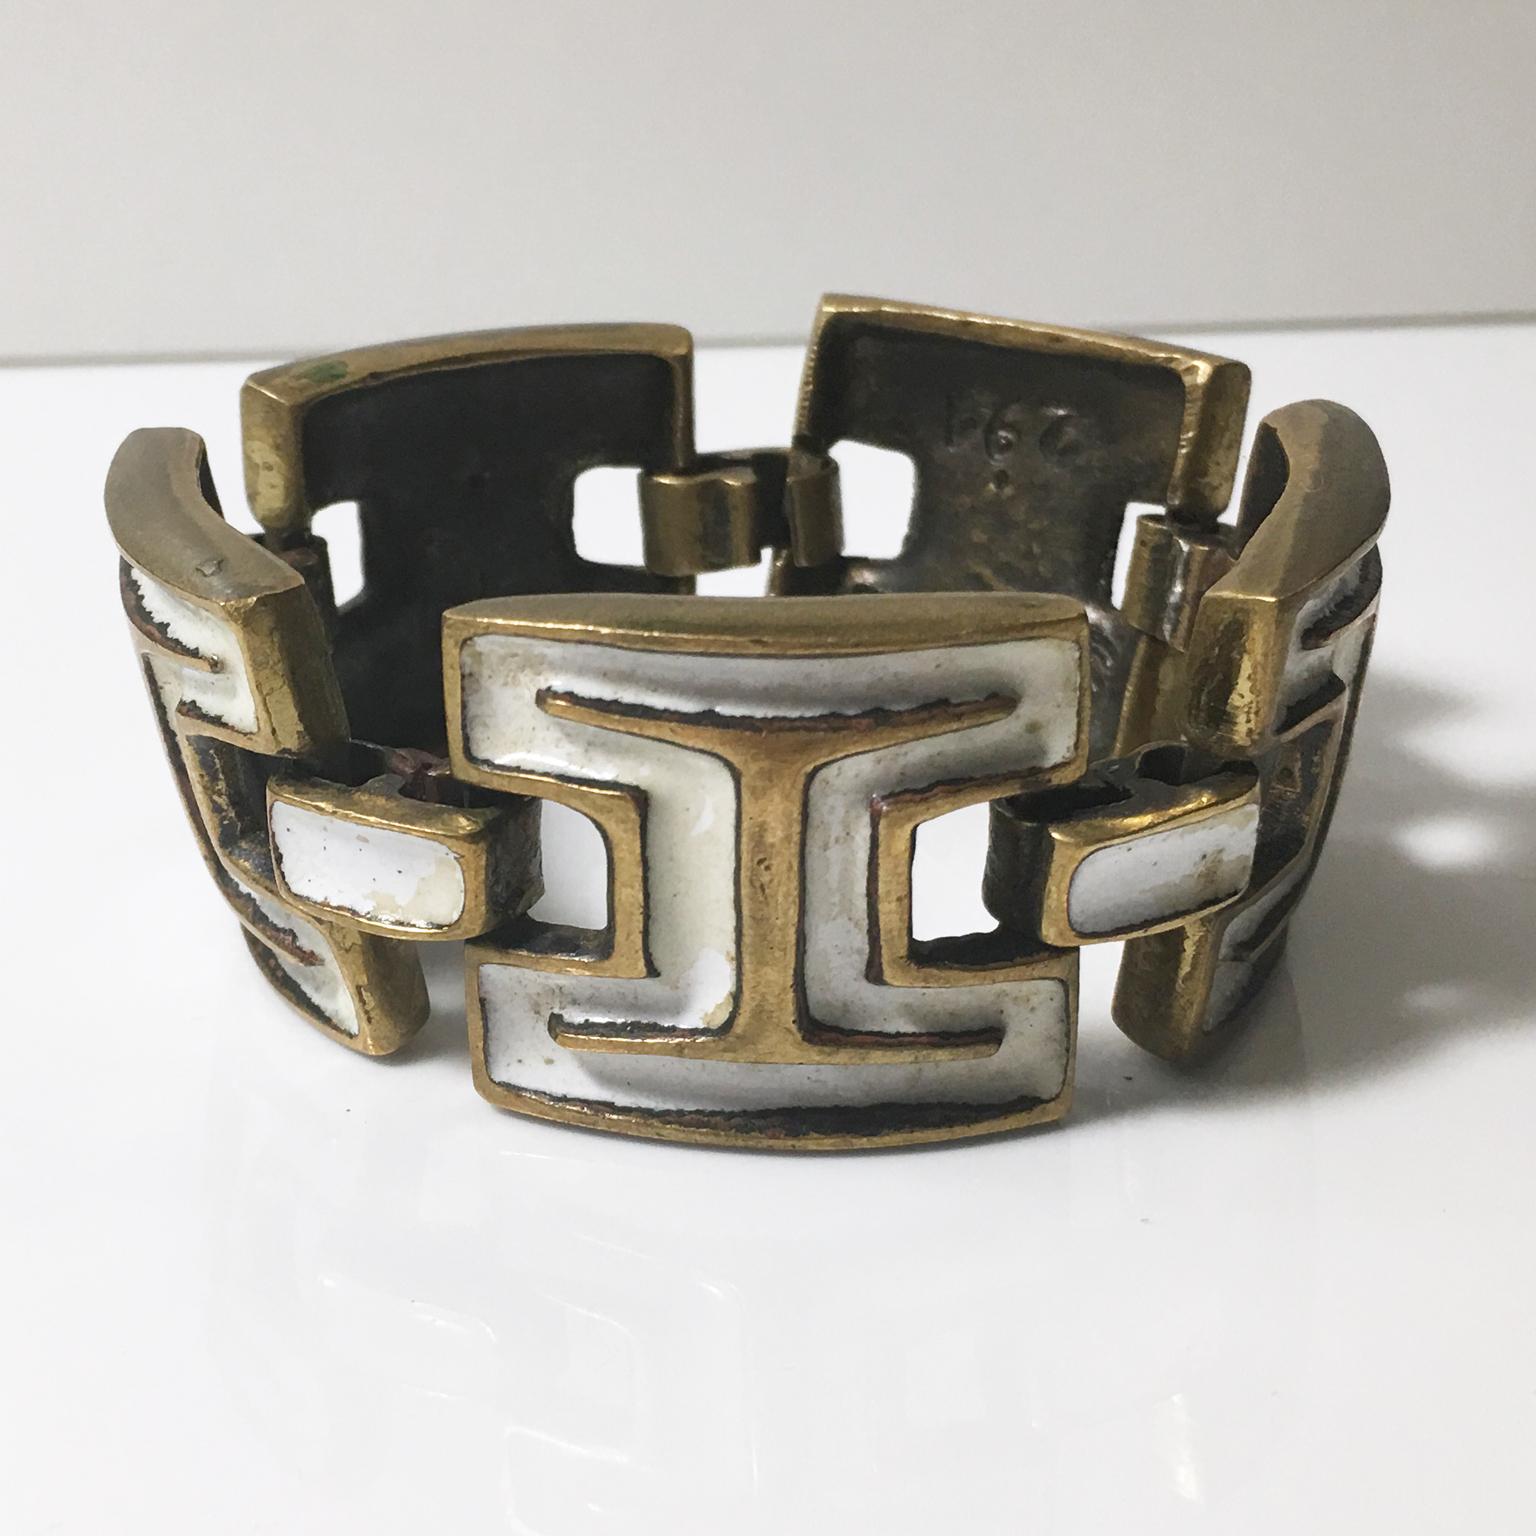 A stunning Mid-Century modernist bronze and enamel link bracelet designed by French artist St Luc. Geometric gilded bronze metal carved elements topped with white enamel. Hook closing clasp. Signed underside: 